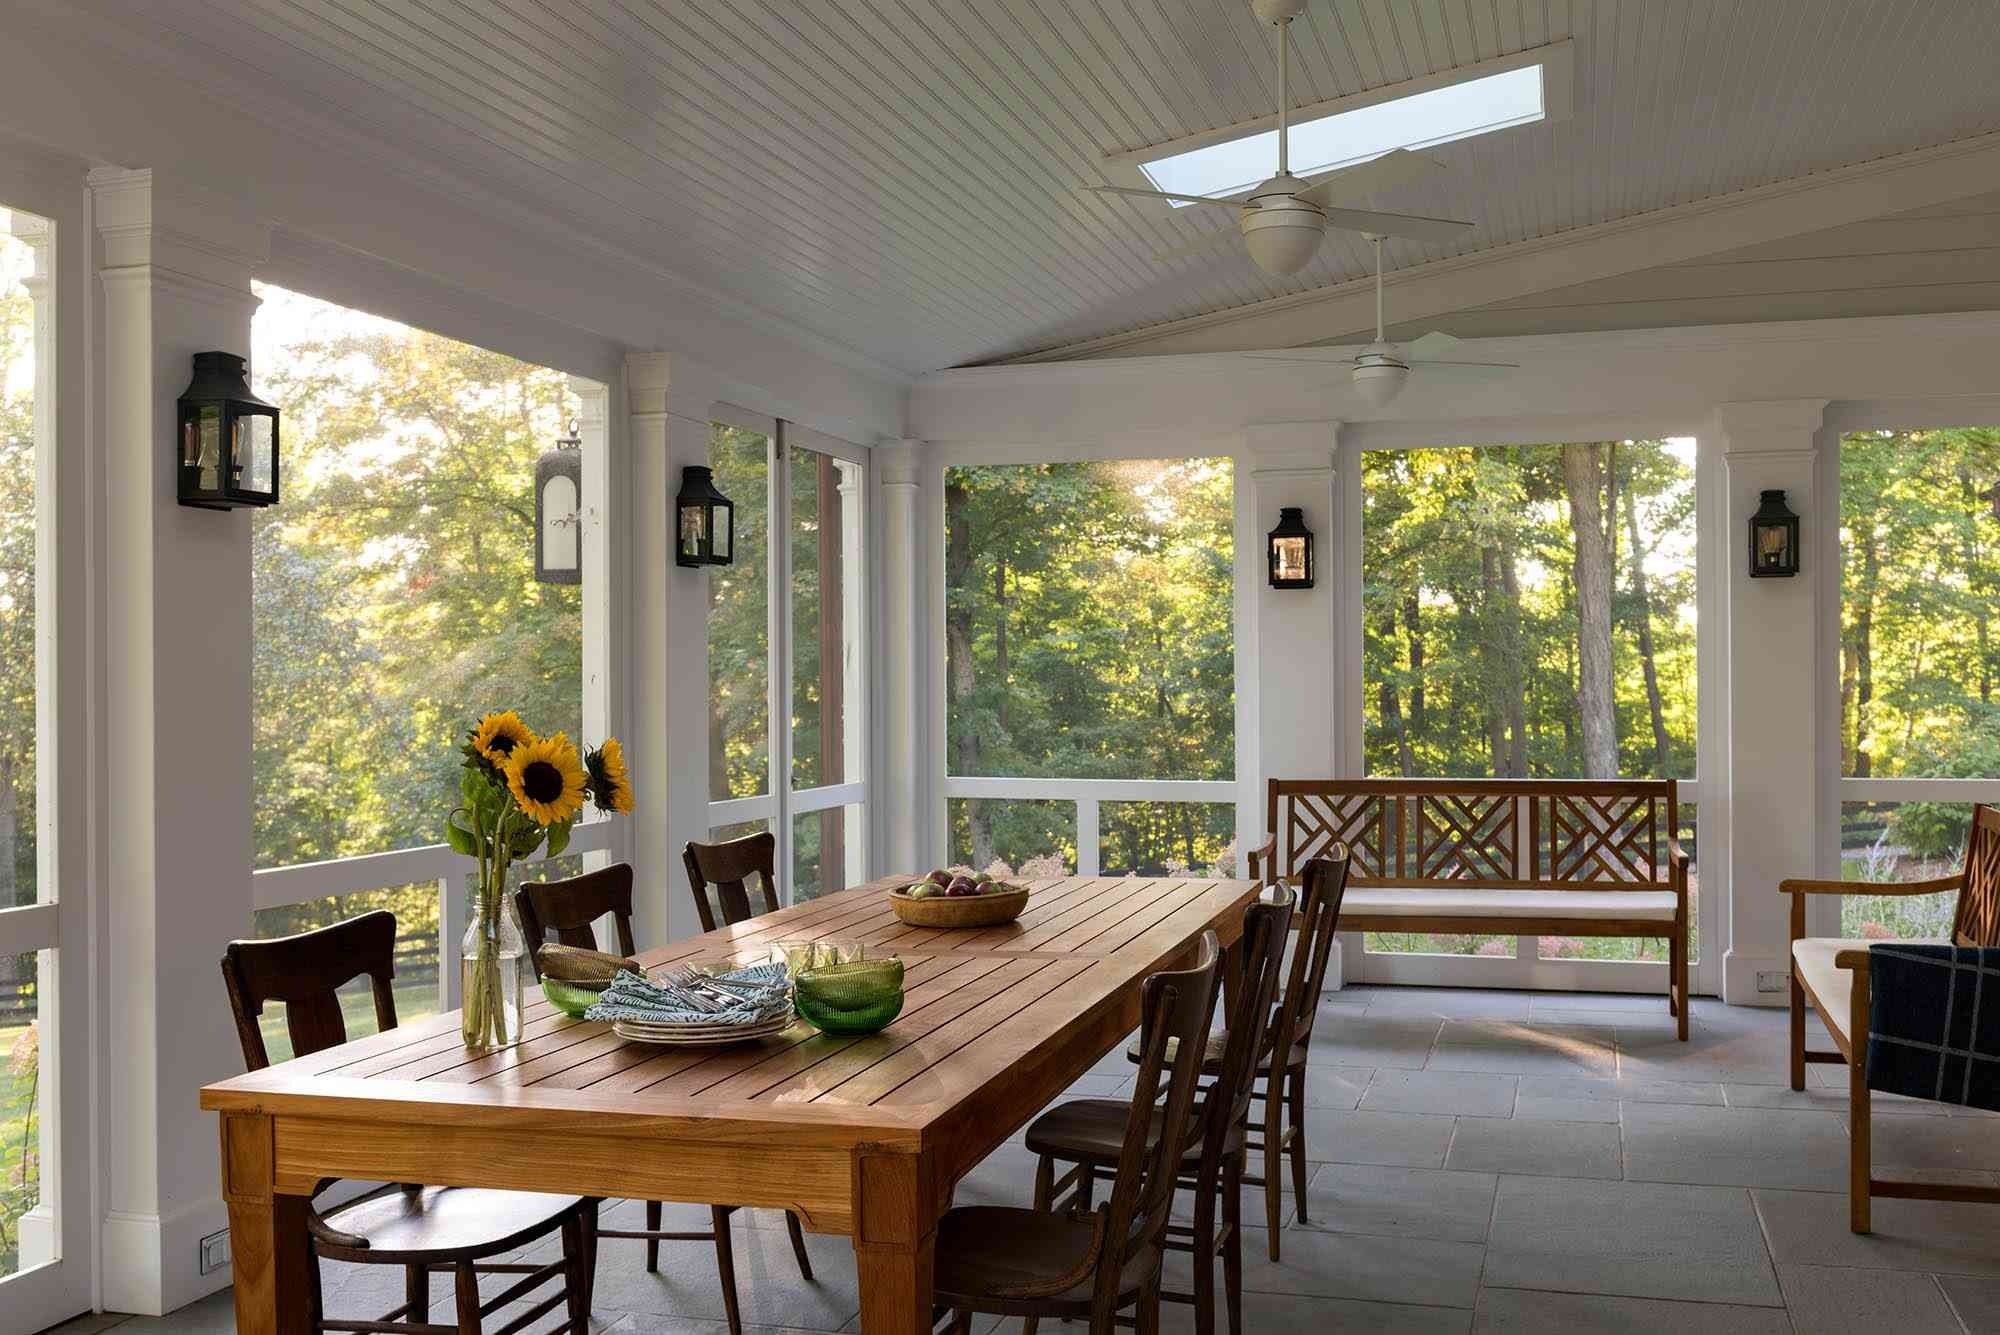 A Serene Retreat: The Charm of a Screened-In Porch